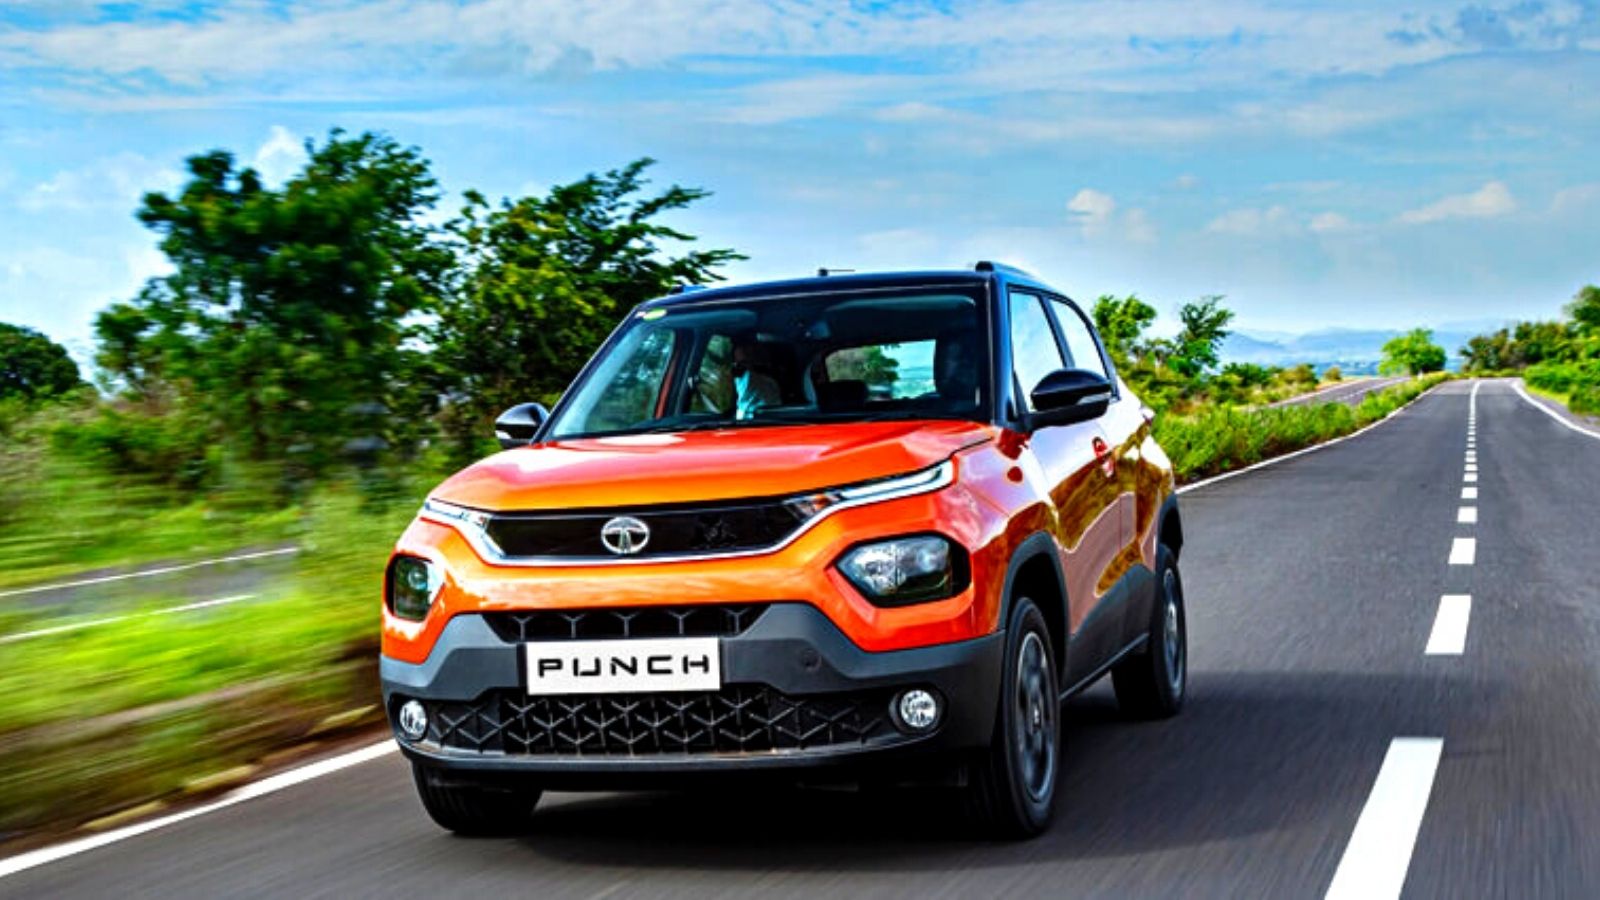 Tata Punch Variants and Features Explained